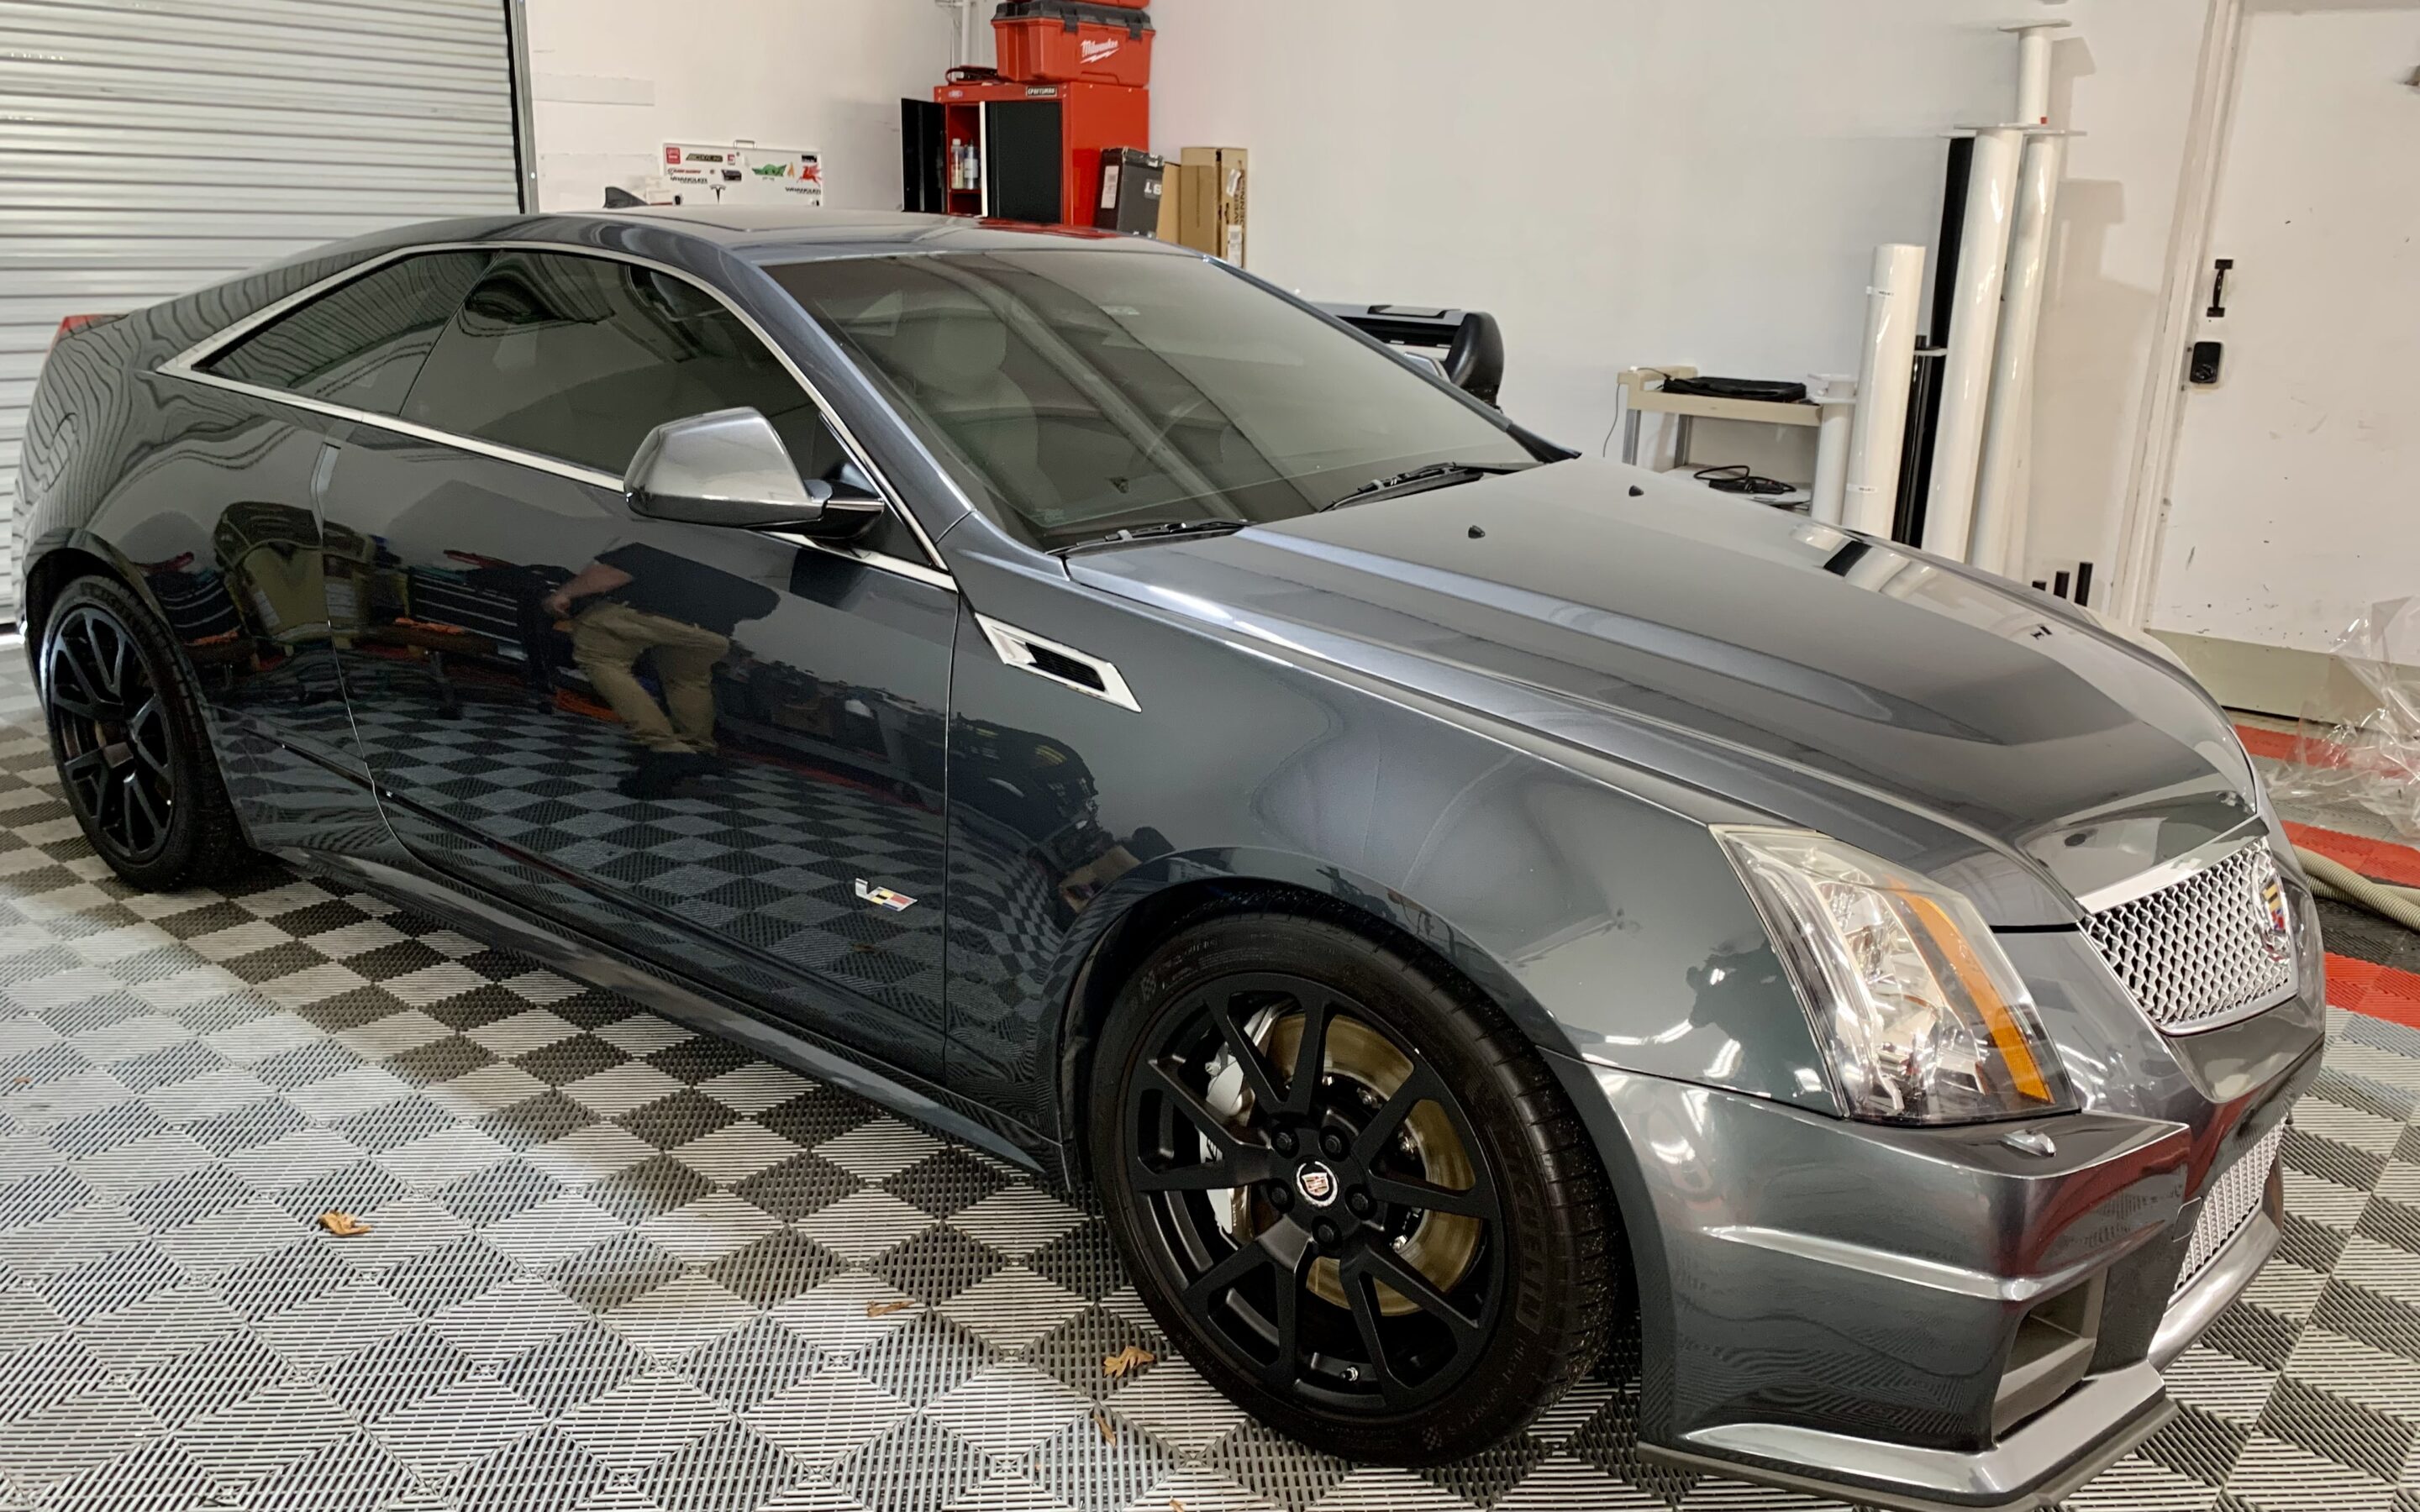 Paint Correction of a 2017 Cadillac CTS CTS-V